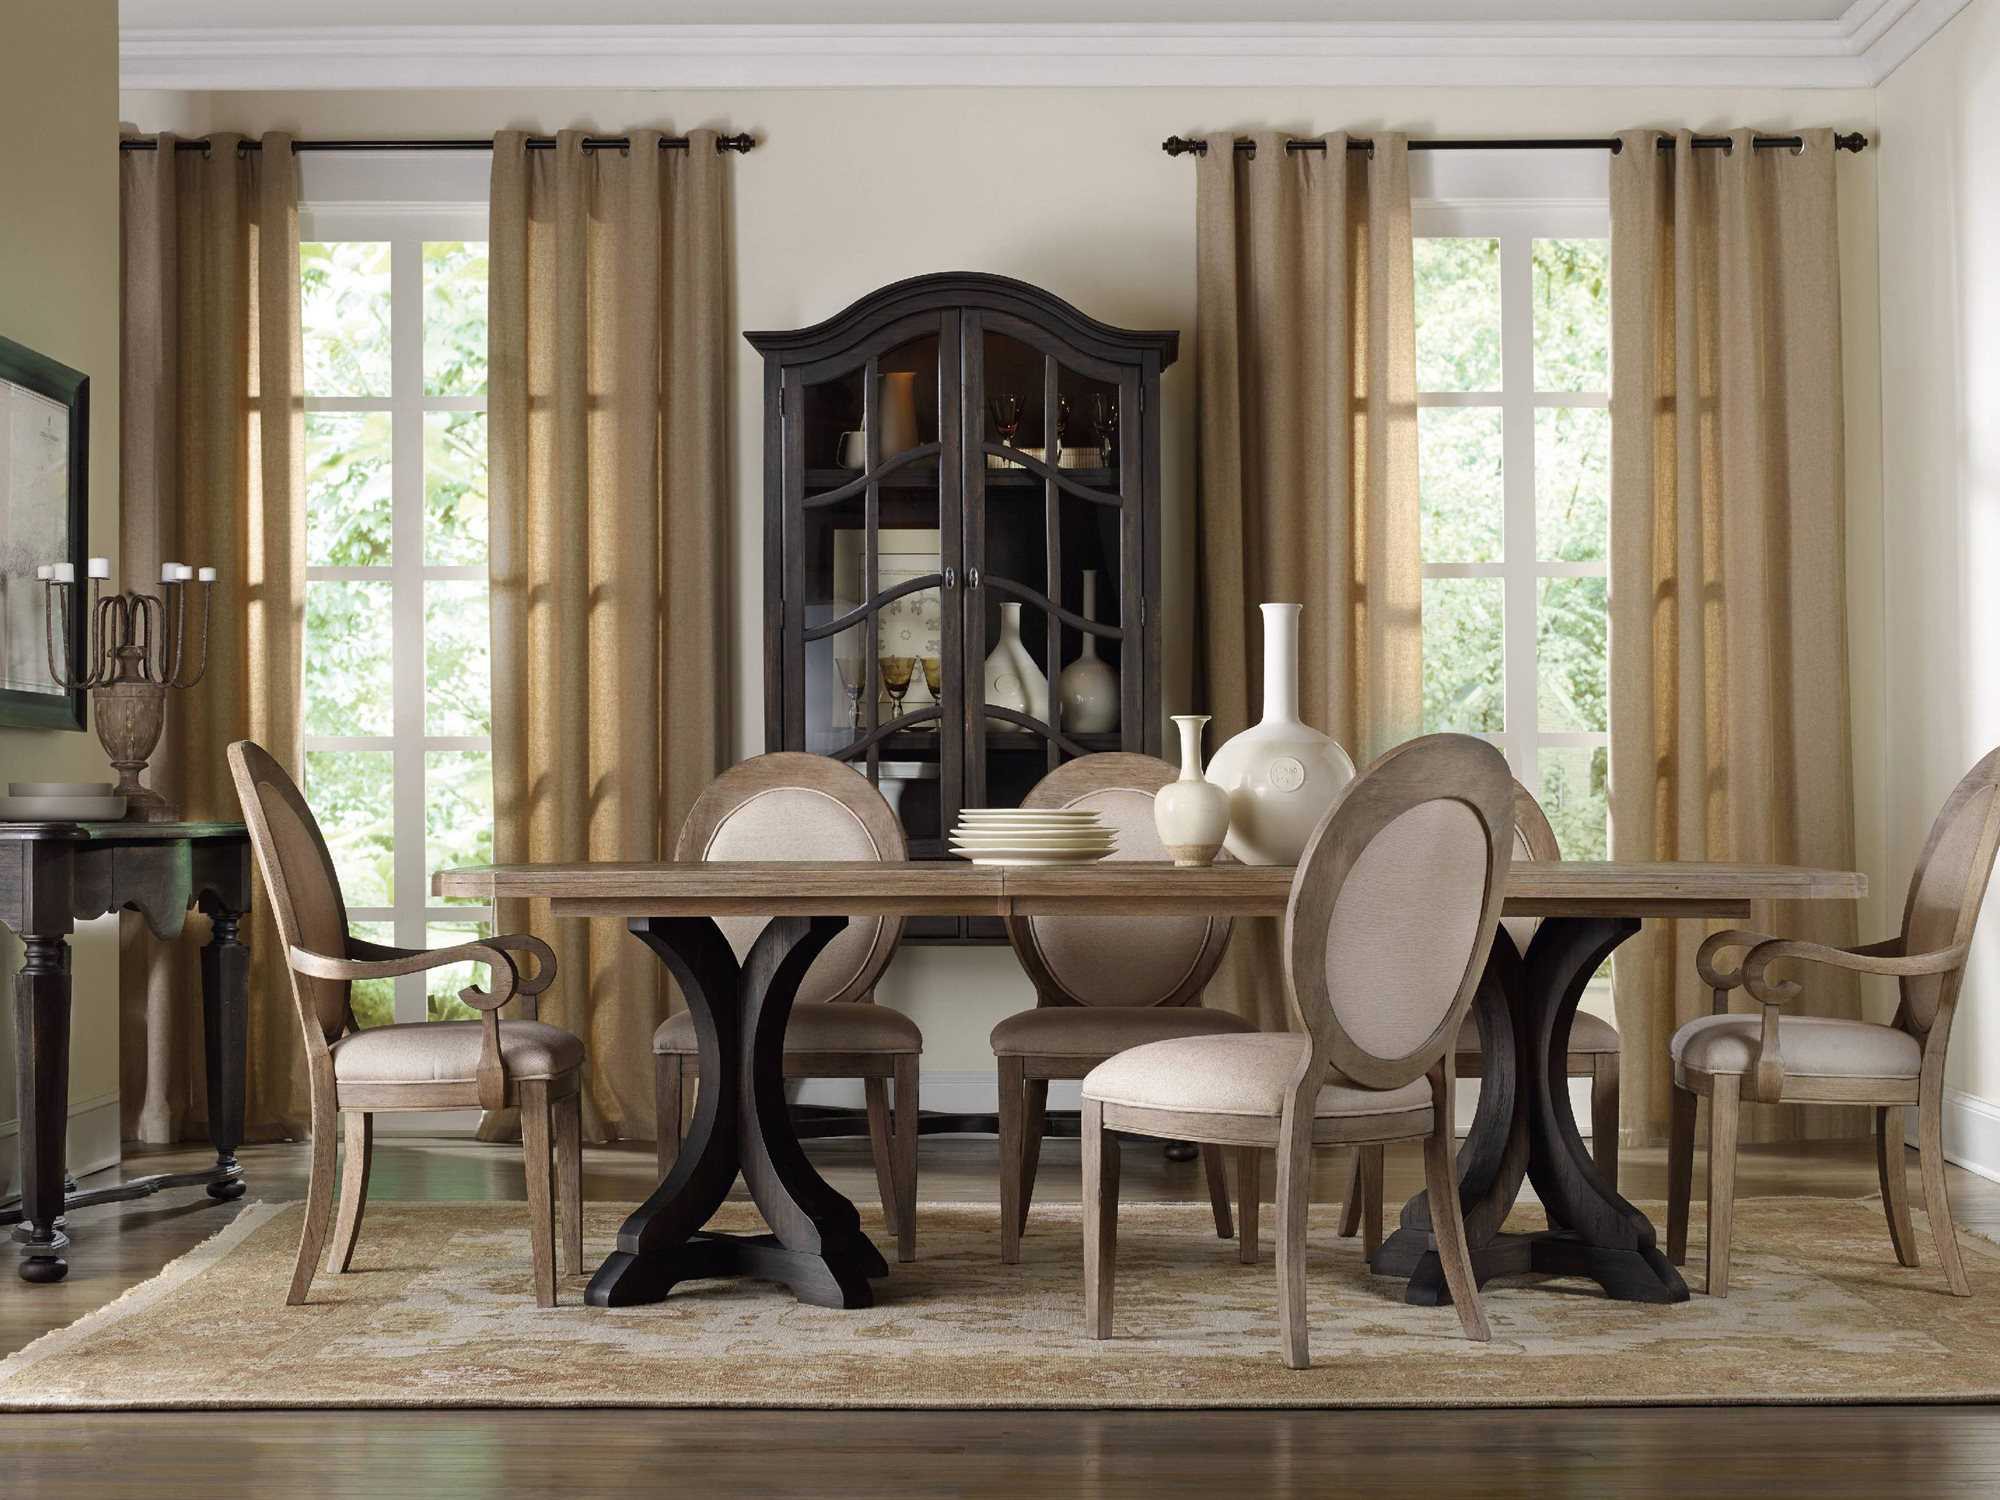 Furniture Corsica Dark Wood With, Light Wood Dining Room Table Sets